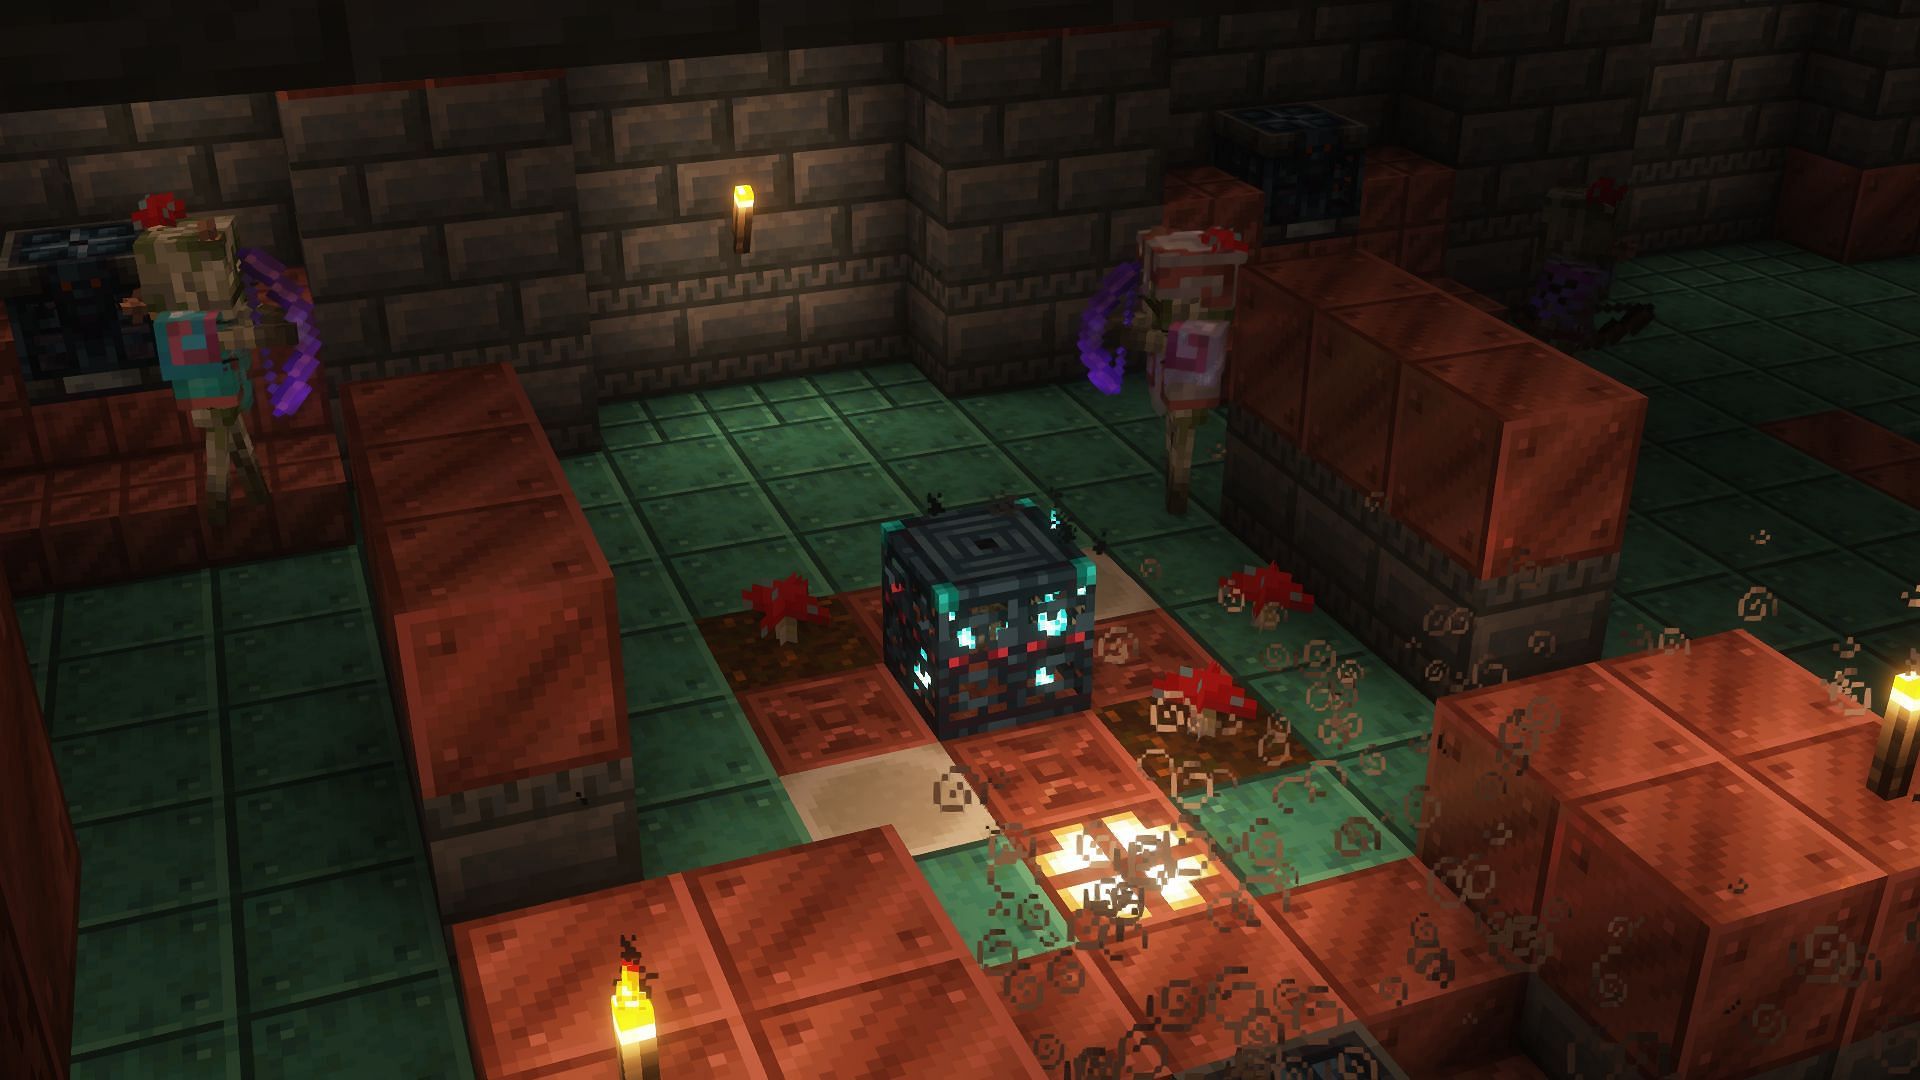 An ominous trial spawner in the trial chambers. (Image via Mojang)